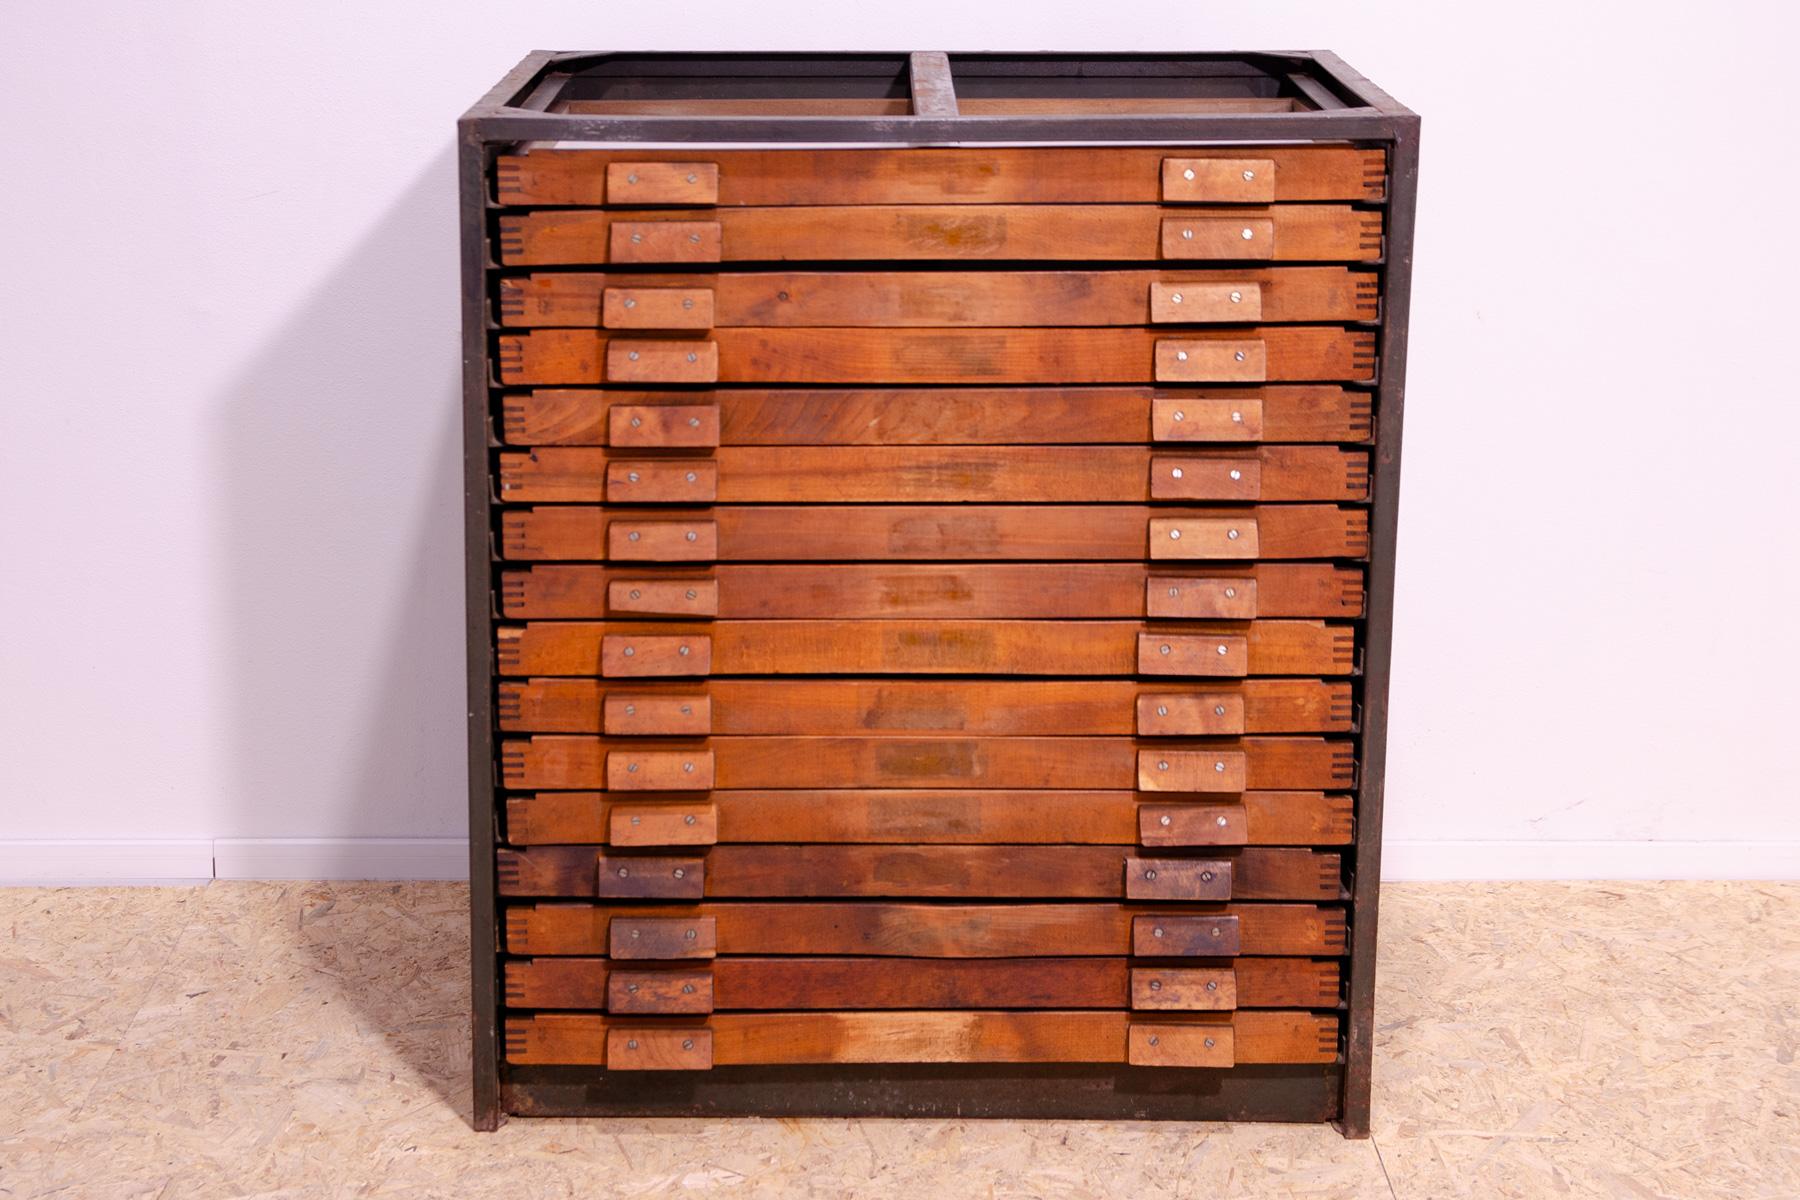 This industrial chest of drawers was made in the former Czechoslovakia in the 1970´s

This chest can be used perfectly as a work cabinet for example for an architect, for a the drawings, or even for craftsmen.
It´s made of iron and wood. There are